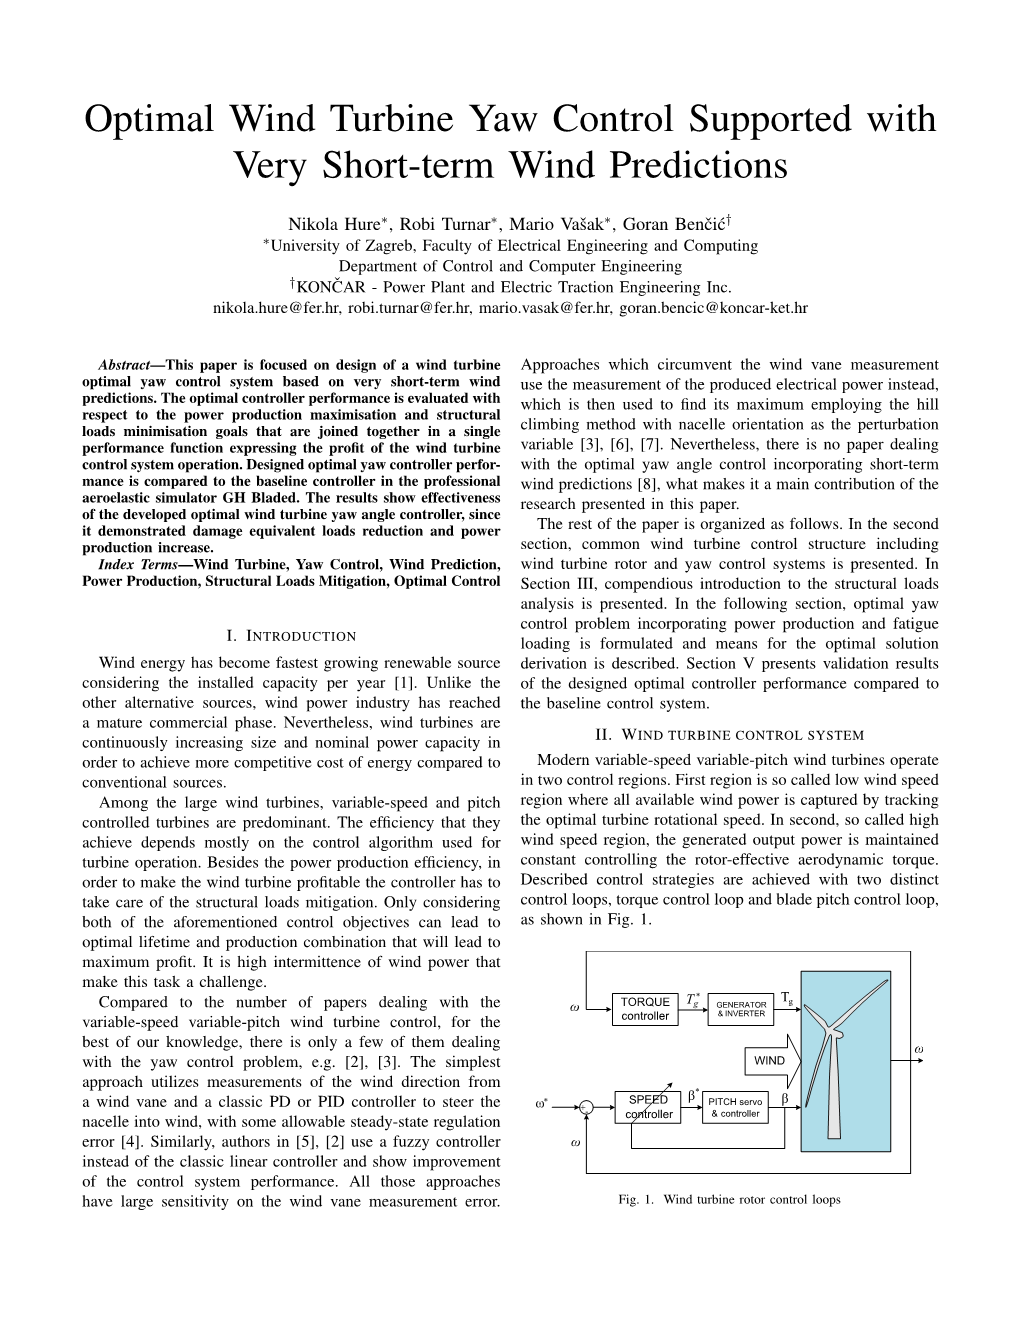 Optimal Wind Turbine Yaw Control Supported with Very Short-Term Wind Predictions